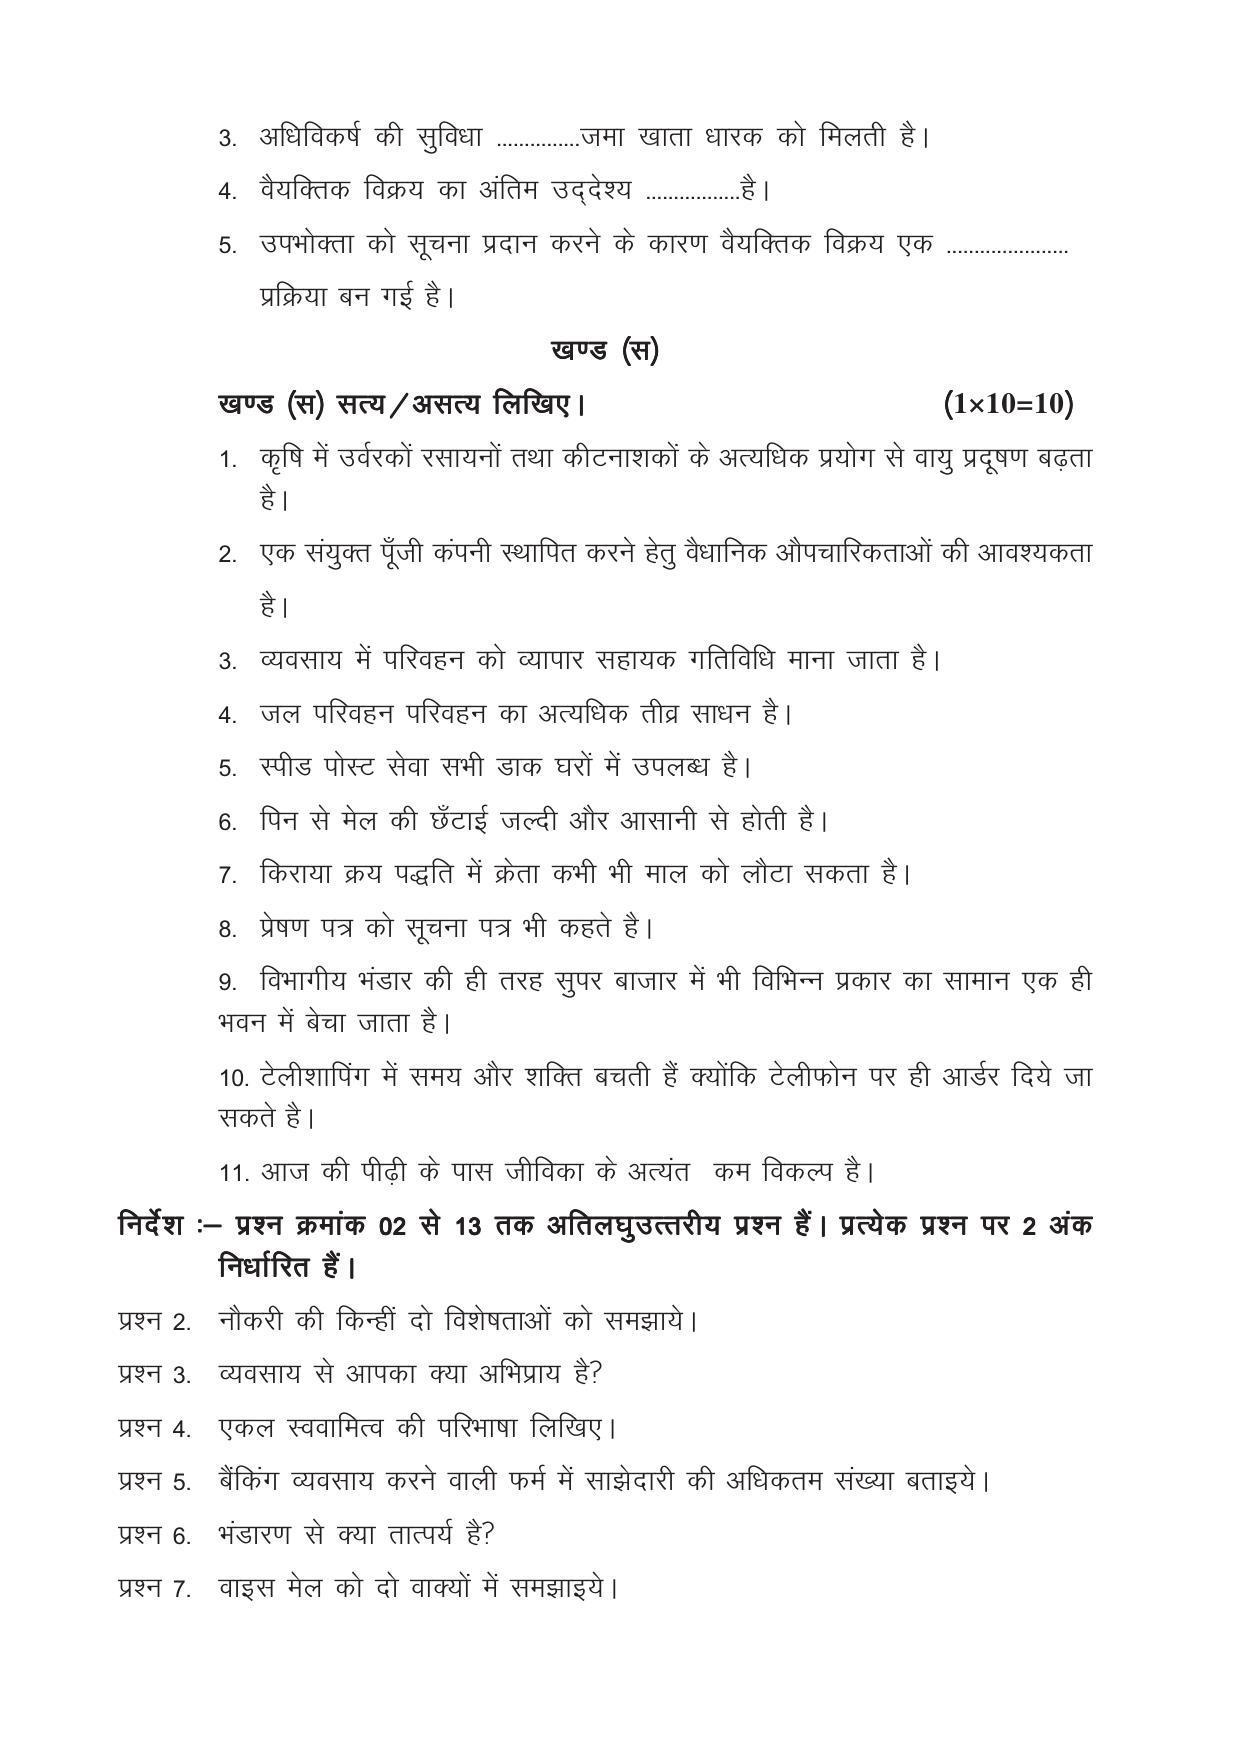 CGSOS Class 10th Model Question Paper - Business studies - III - Page 2